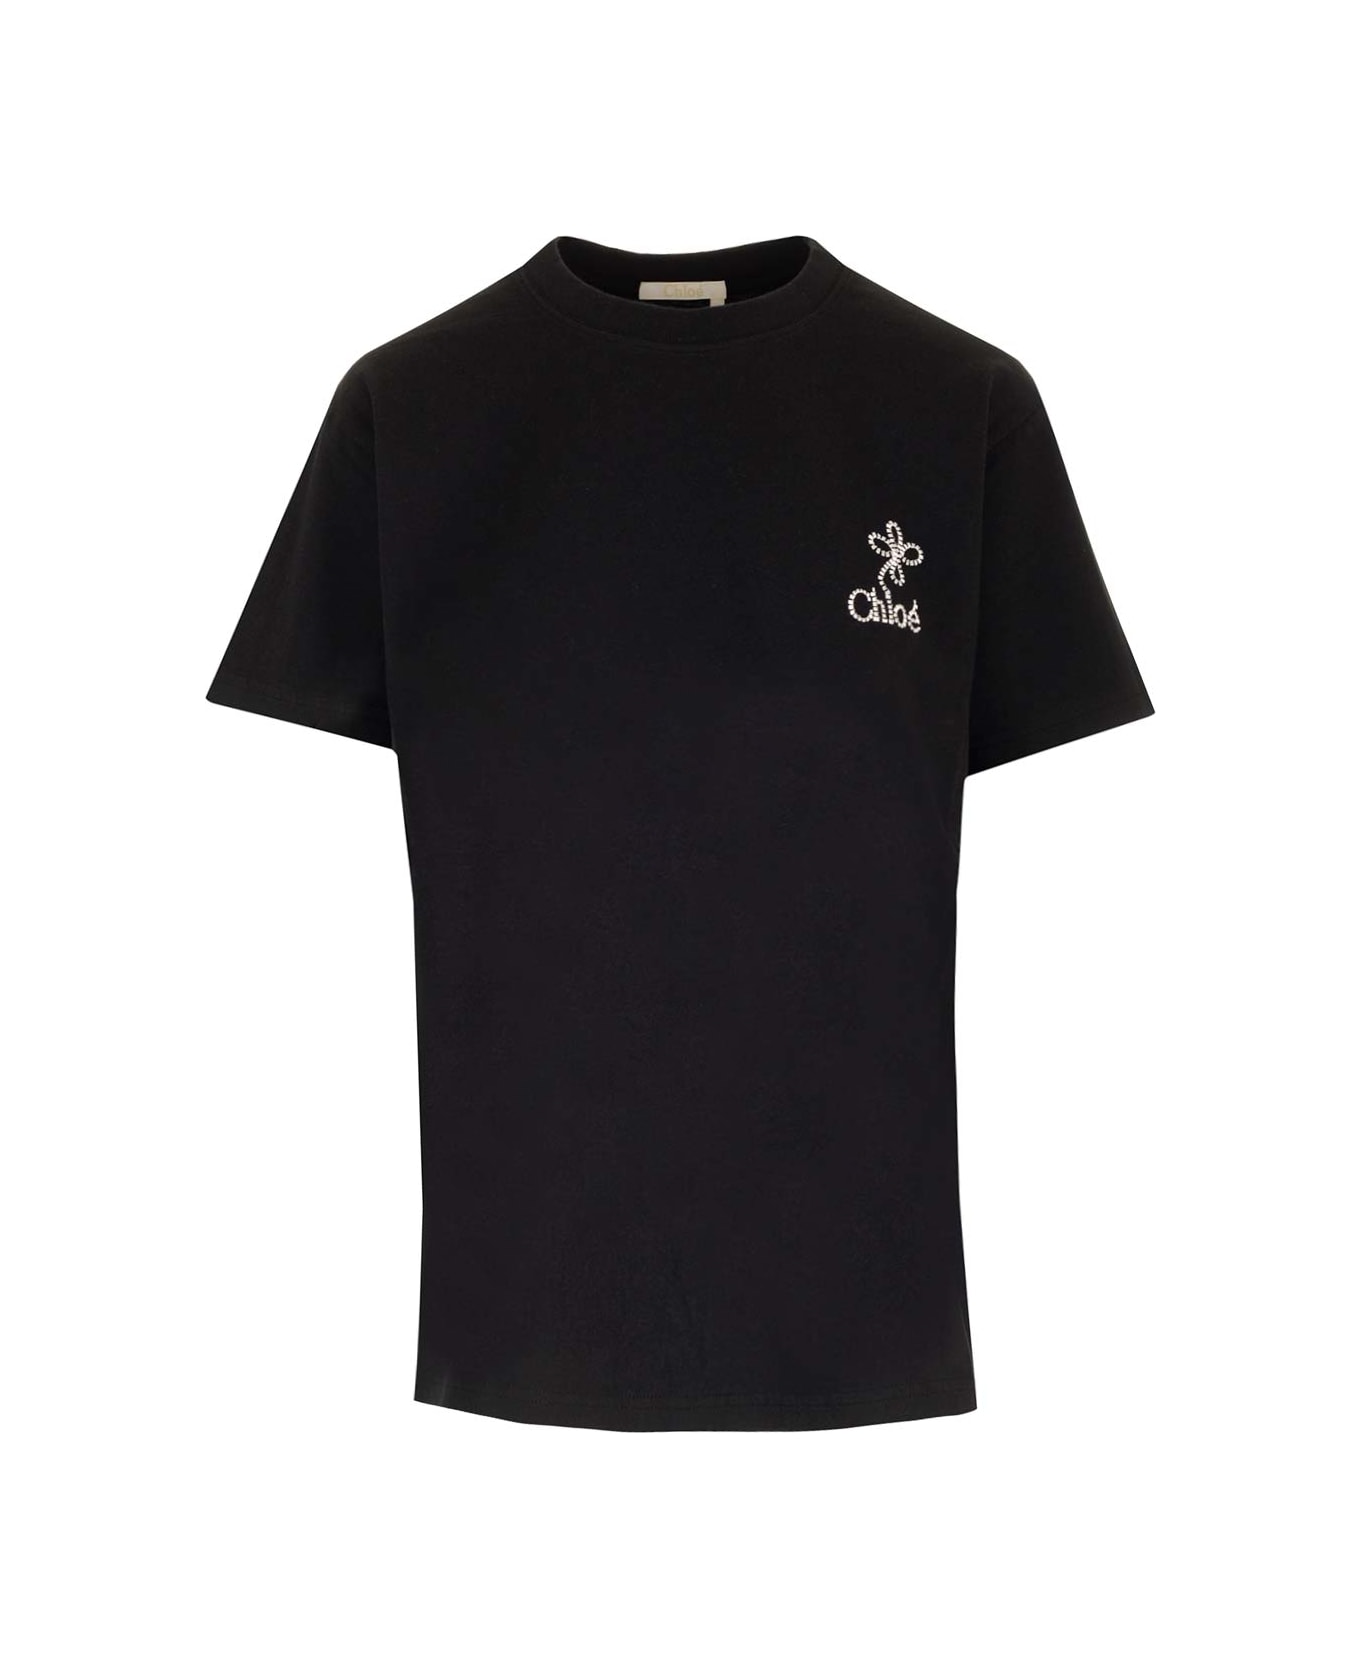 Chloé Black T-shirt With Embroidered Logo - Black